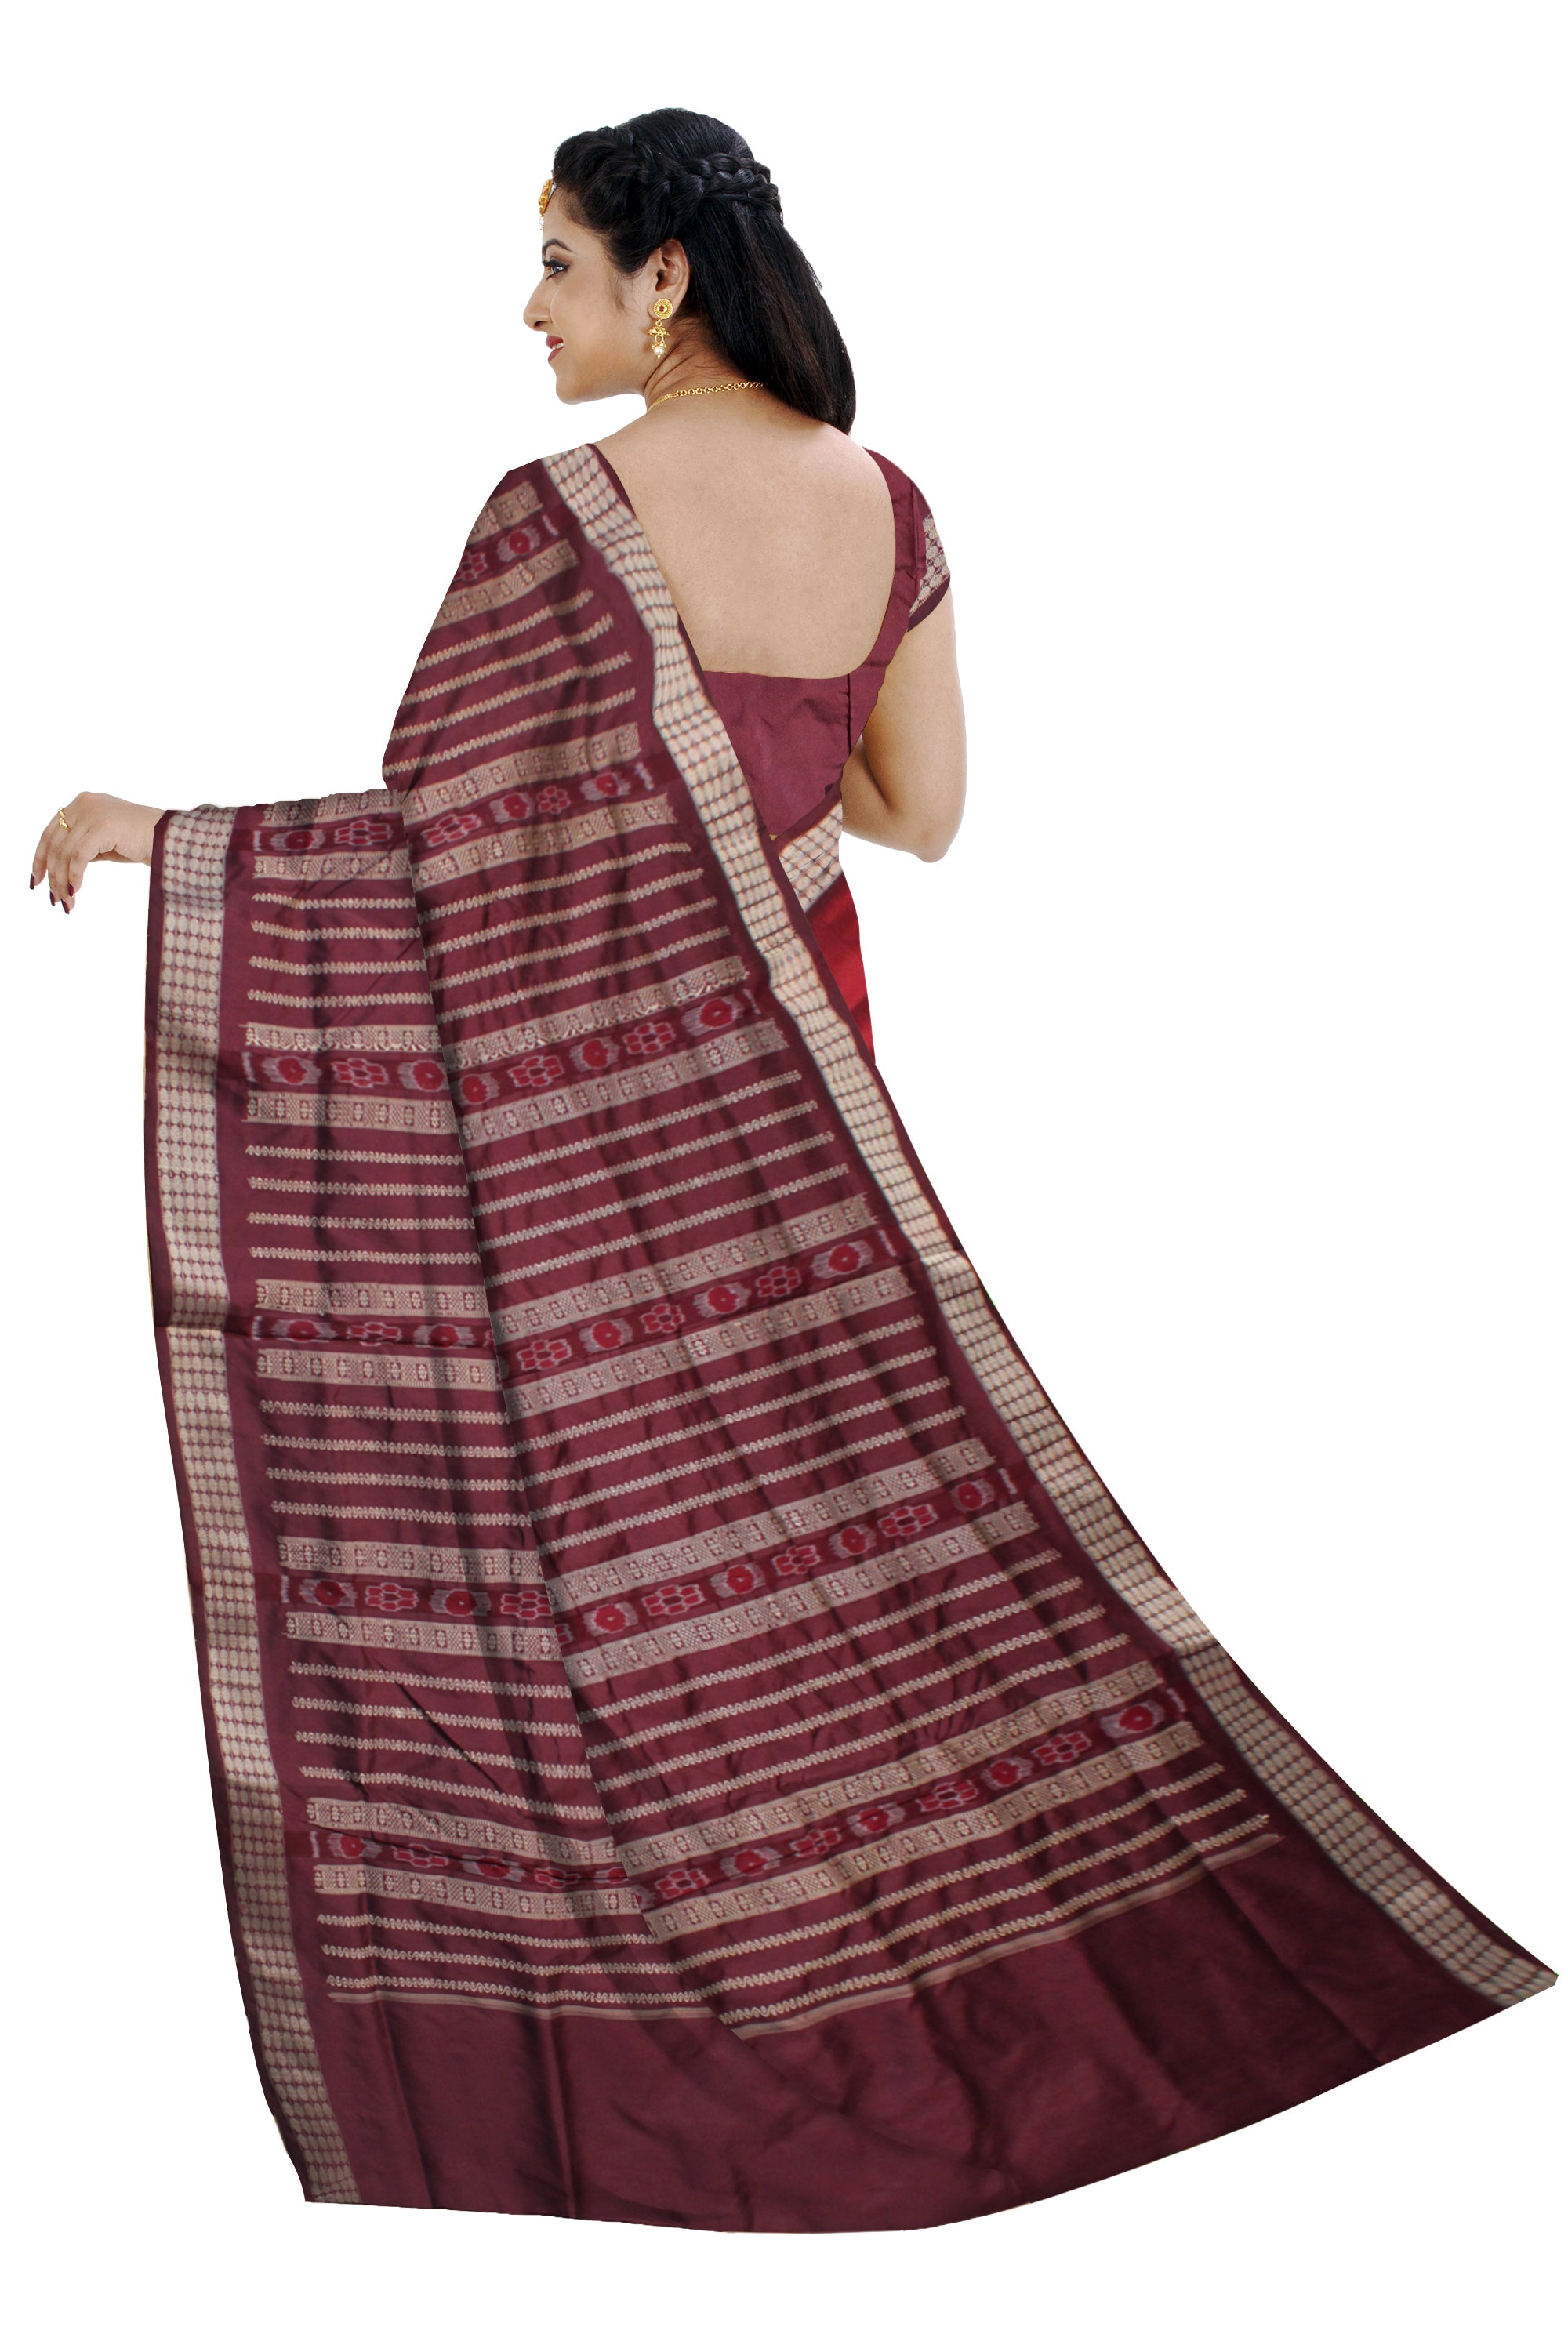 HALF BODY DESIGN PATLI PATA SAREE IS MAROON AND COFFEE COLOR BASE,COMES WITH MATCHING BLOUSE PIECE. - Koshali Arts & Crafts Enterprise